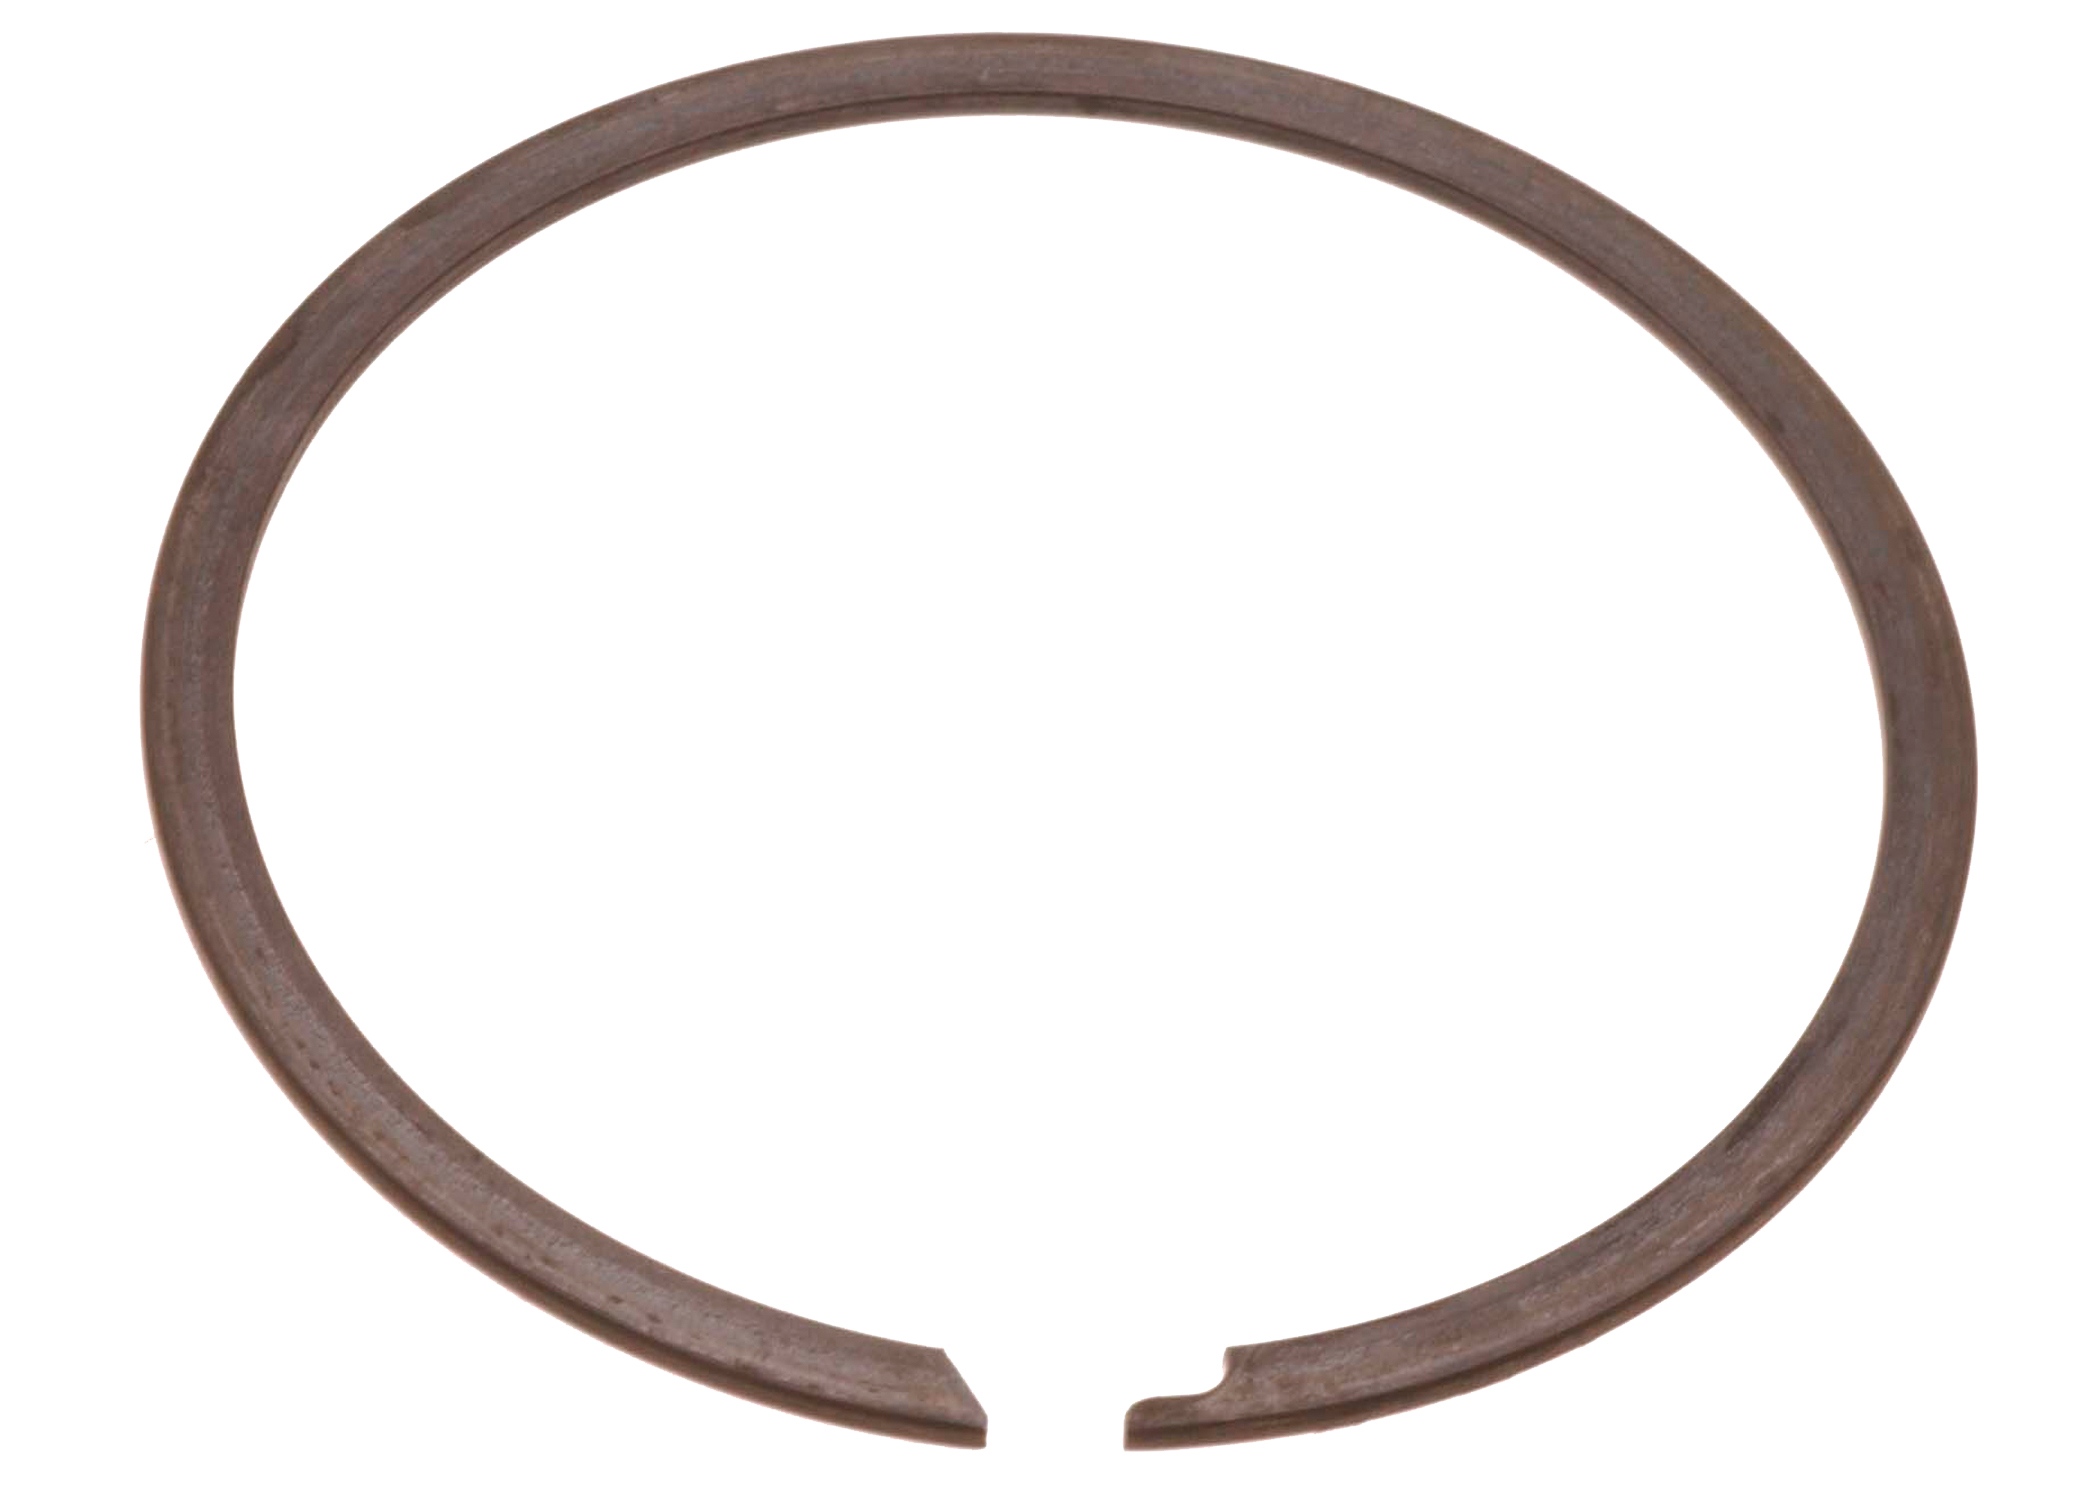 GM GENUINE PARTS - Automatic Transmission Clutch Spring Retaining Ring (Overrun) - GMP 24216149